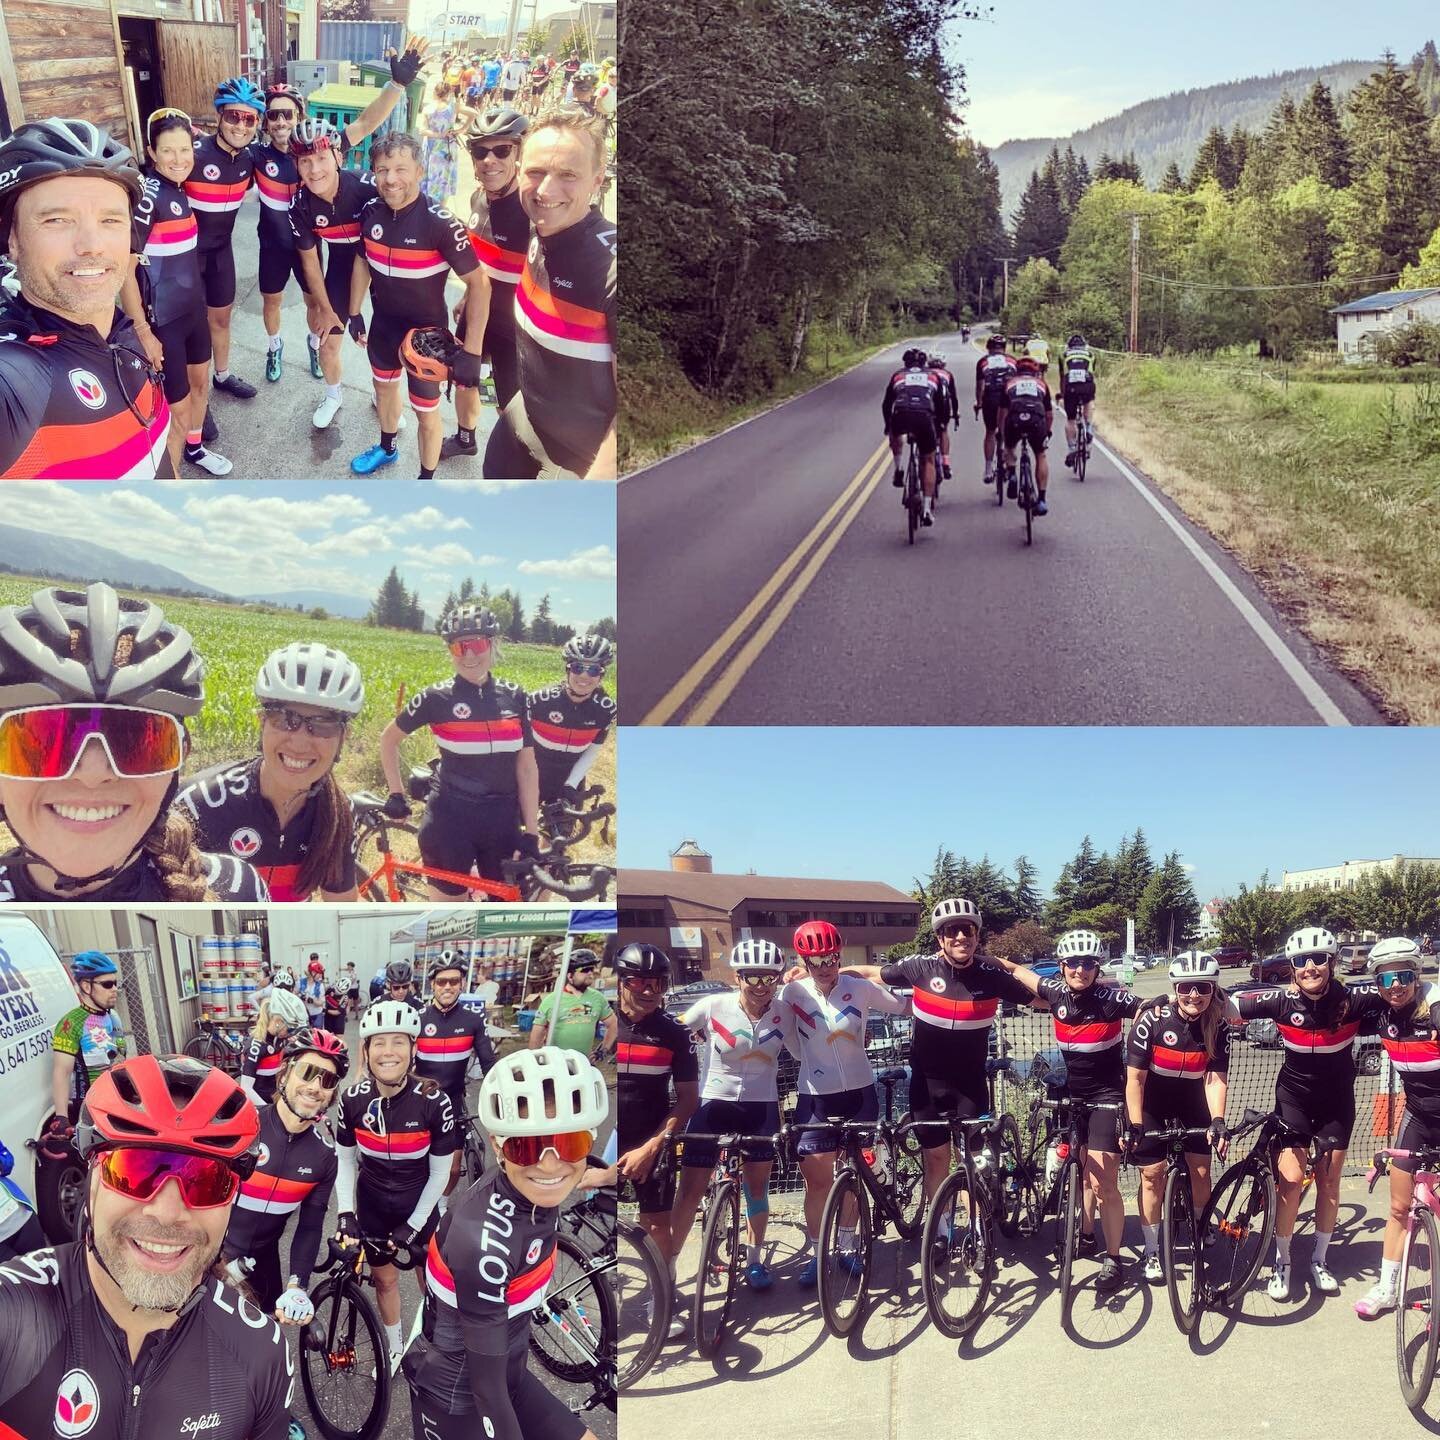 Another fantastic Lotus adventure riding around Whatcom county. 35 riders for this fun event @tourdewhatcom #golotusgo